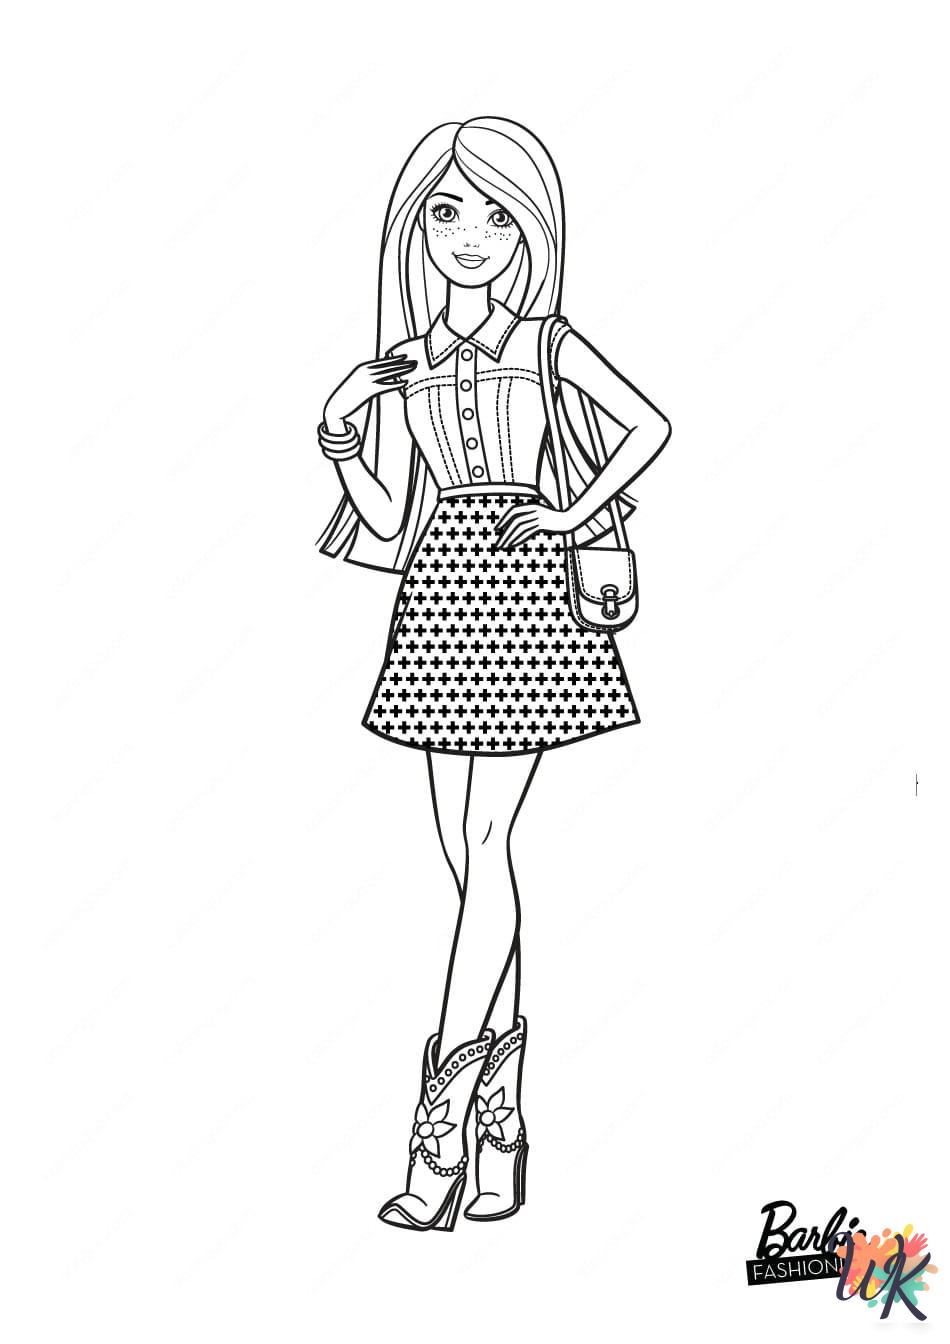 Barbie coloring pages for adults pdf